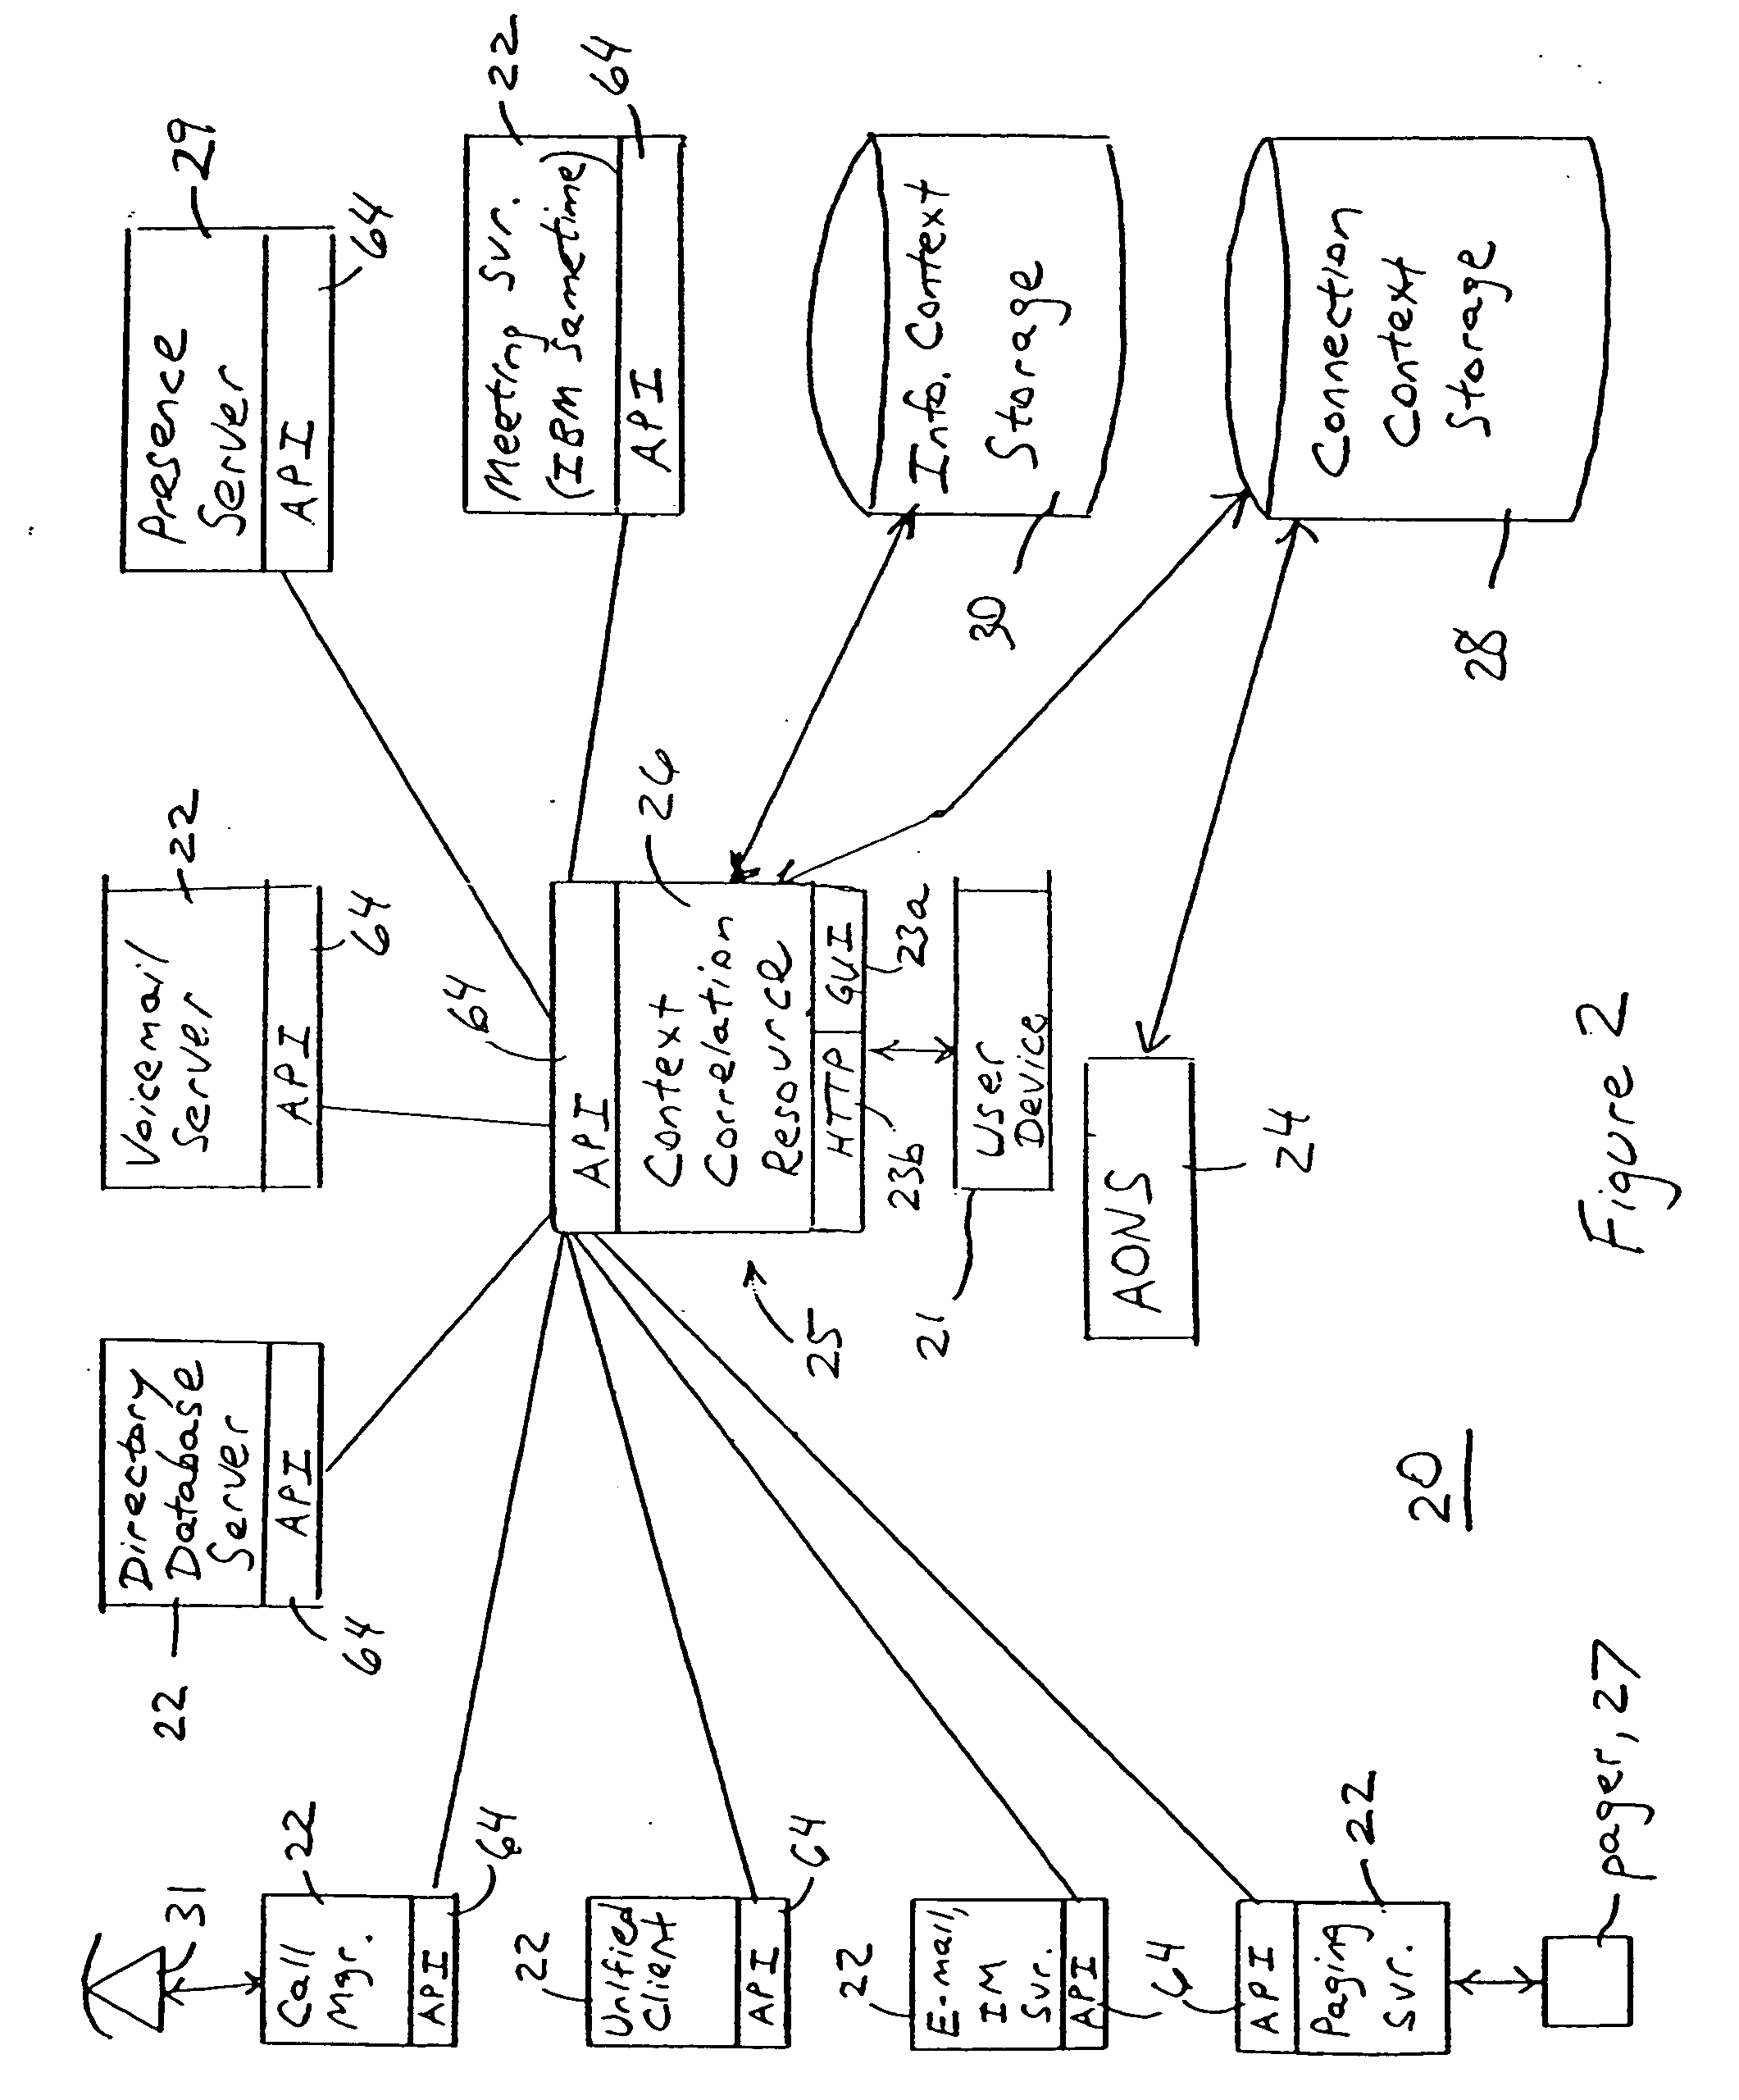 Generating search results based on determined relationships between data objects and user connections to identified destinations